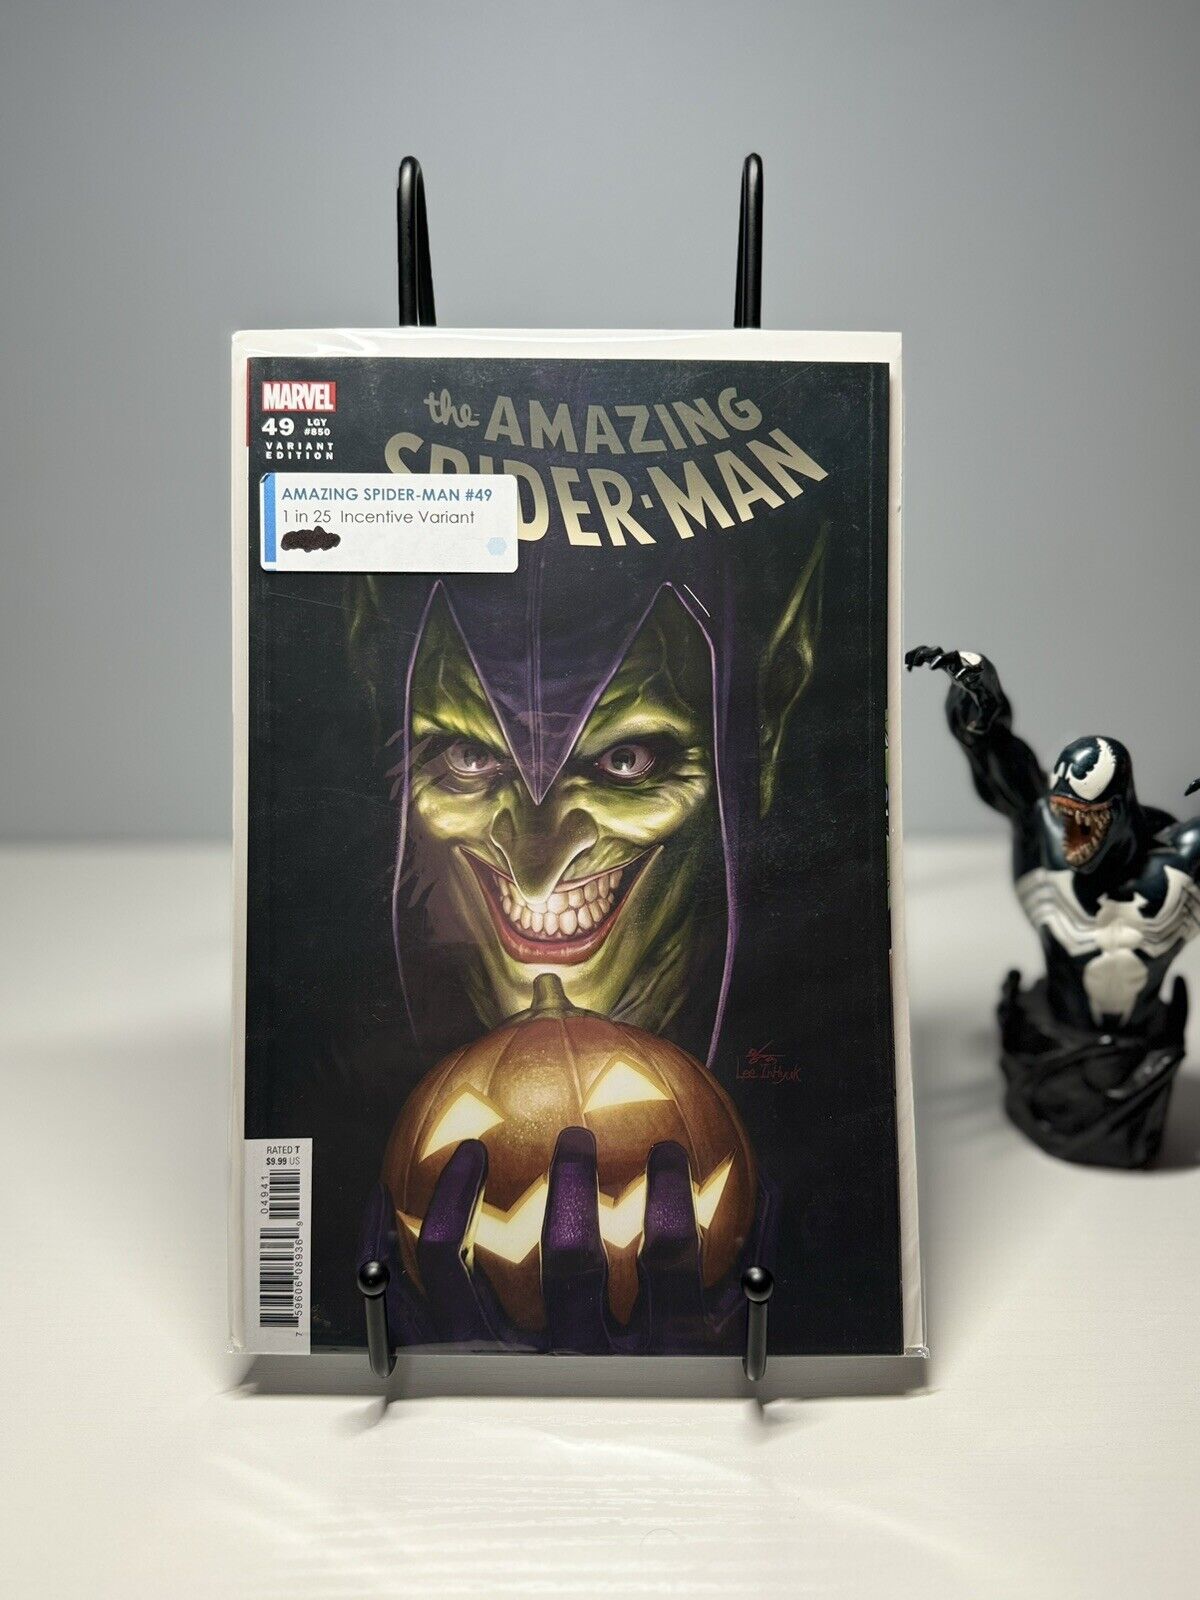 The Amazing Spider-Man #49 | Variant Edition